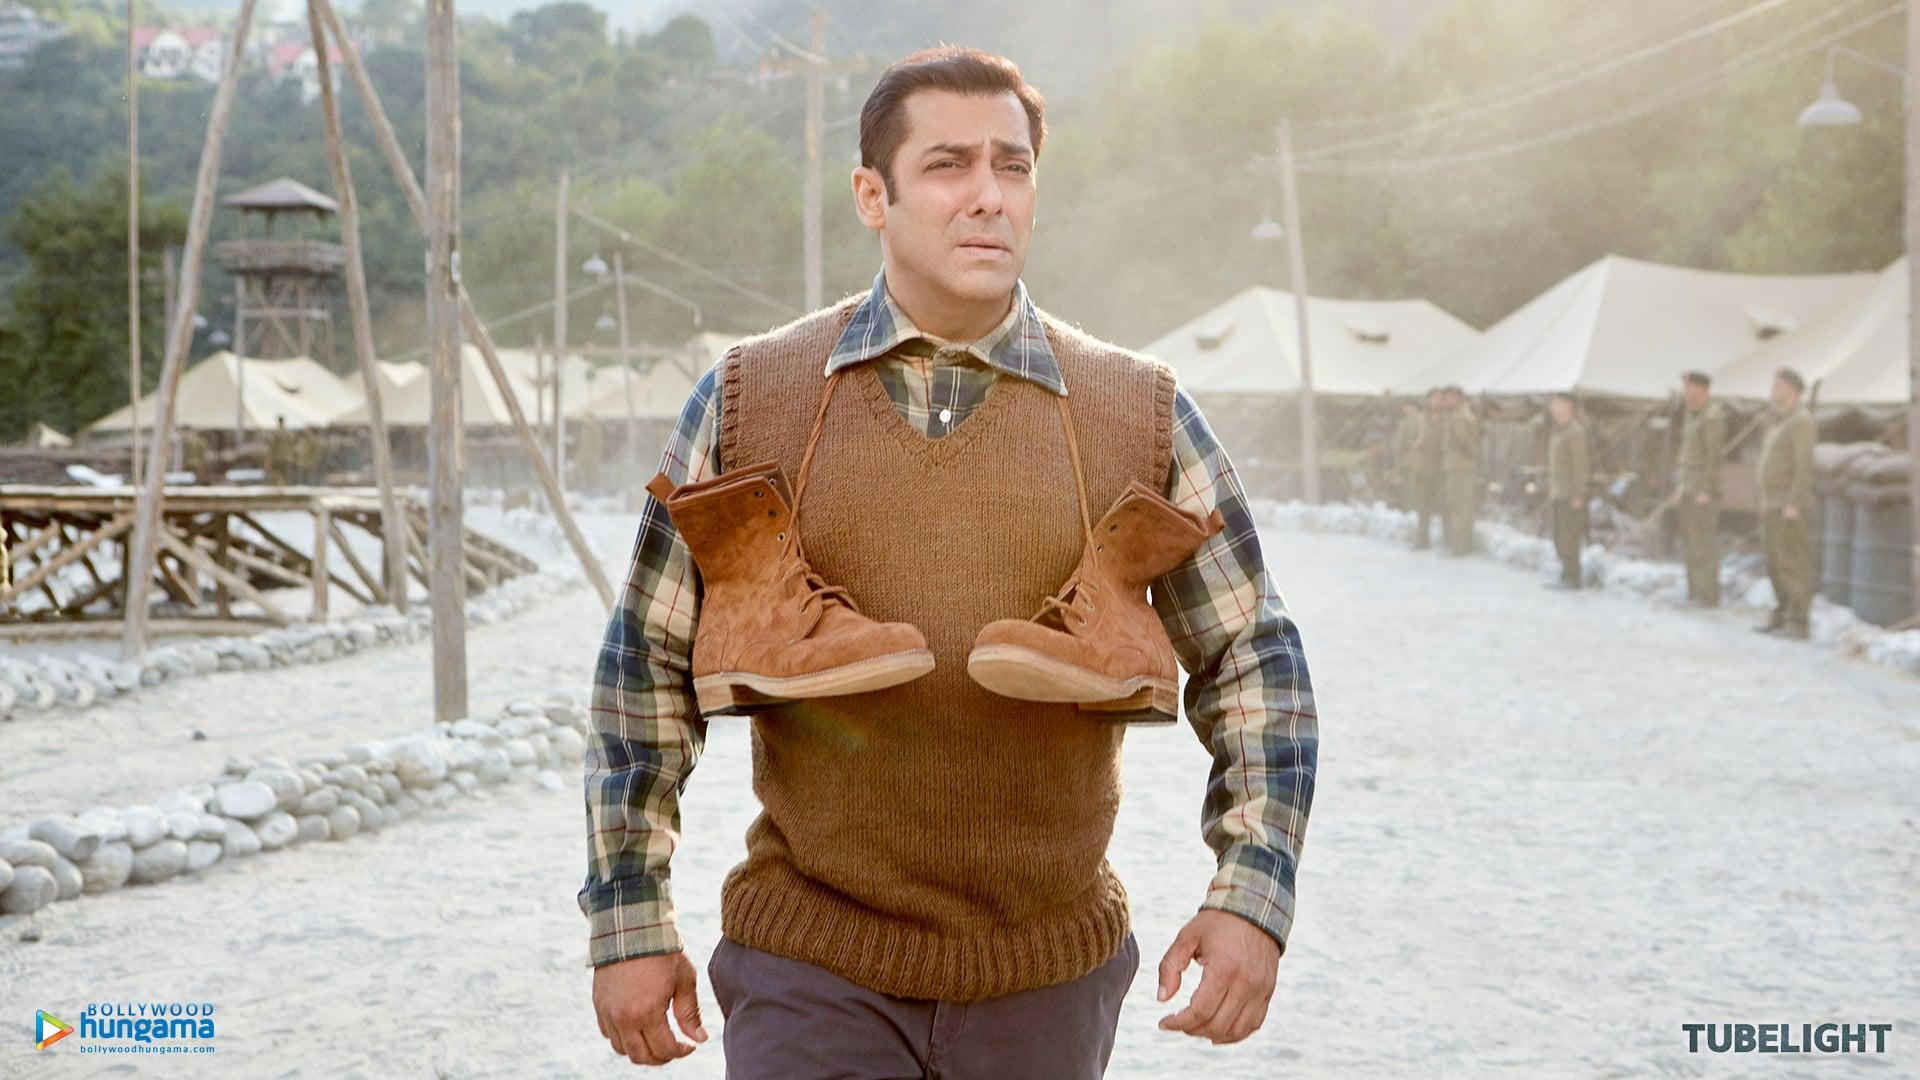 Tubelight - Where to Watch and Stream - TV Guide